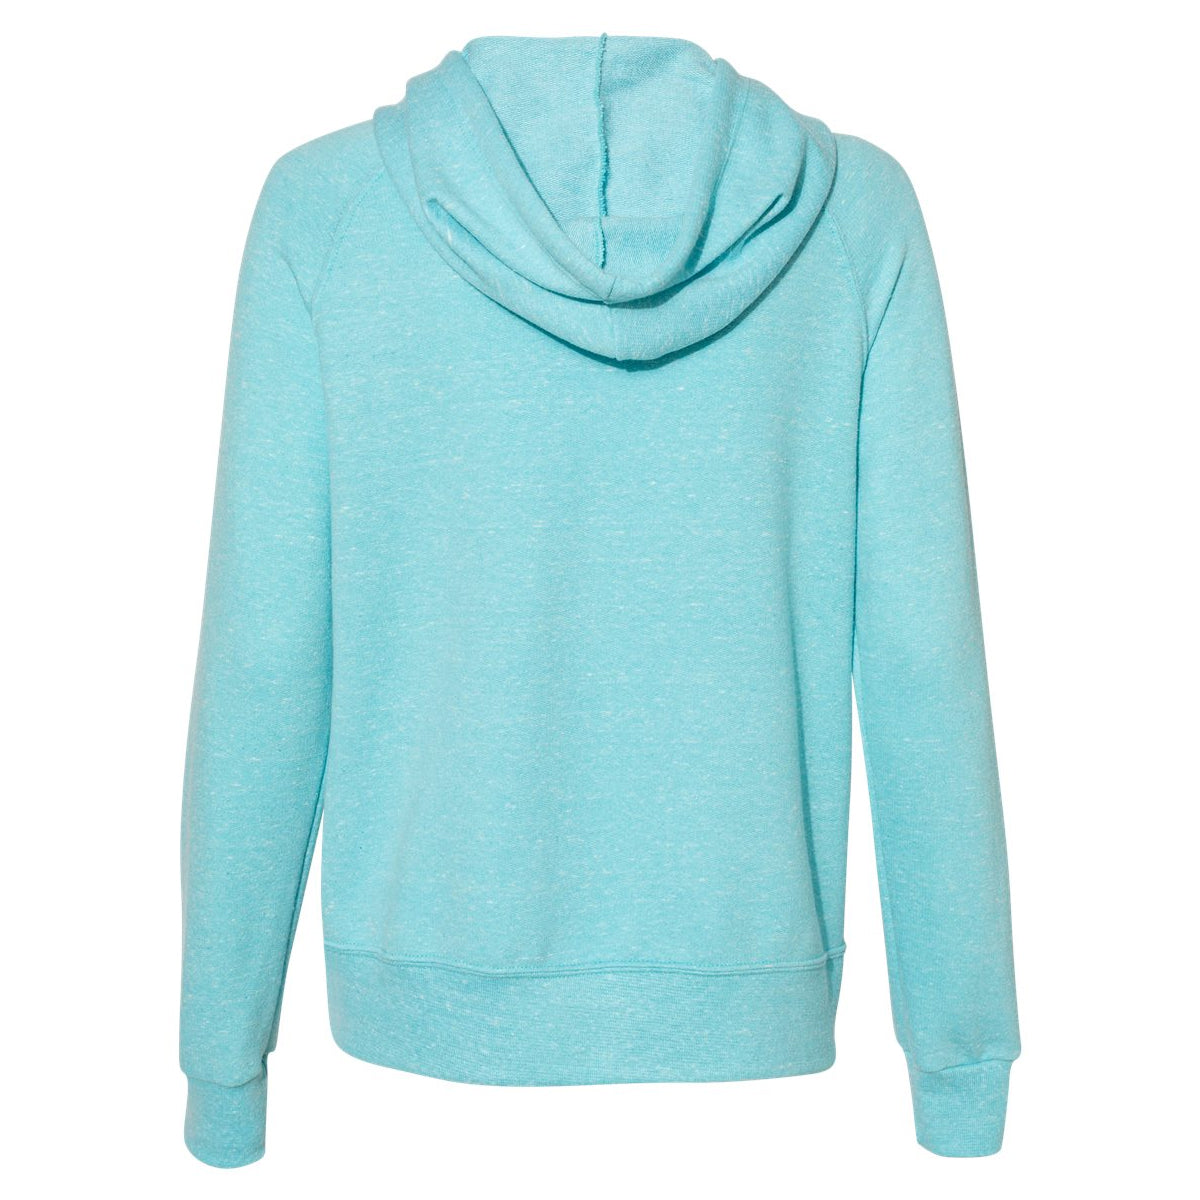 Jerzees Women’s Full Zip Cotton Blend Hoodie With Side Pockets